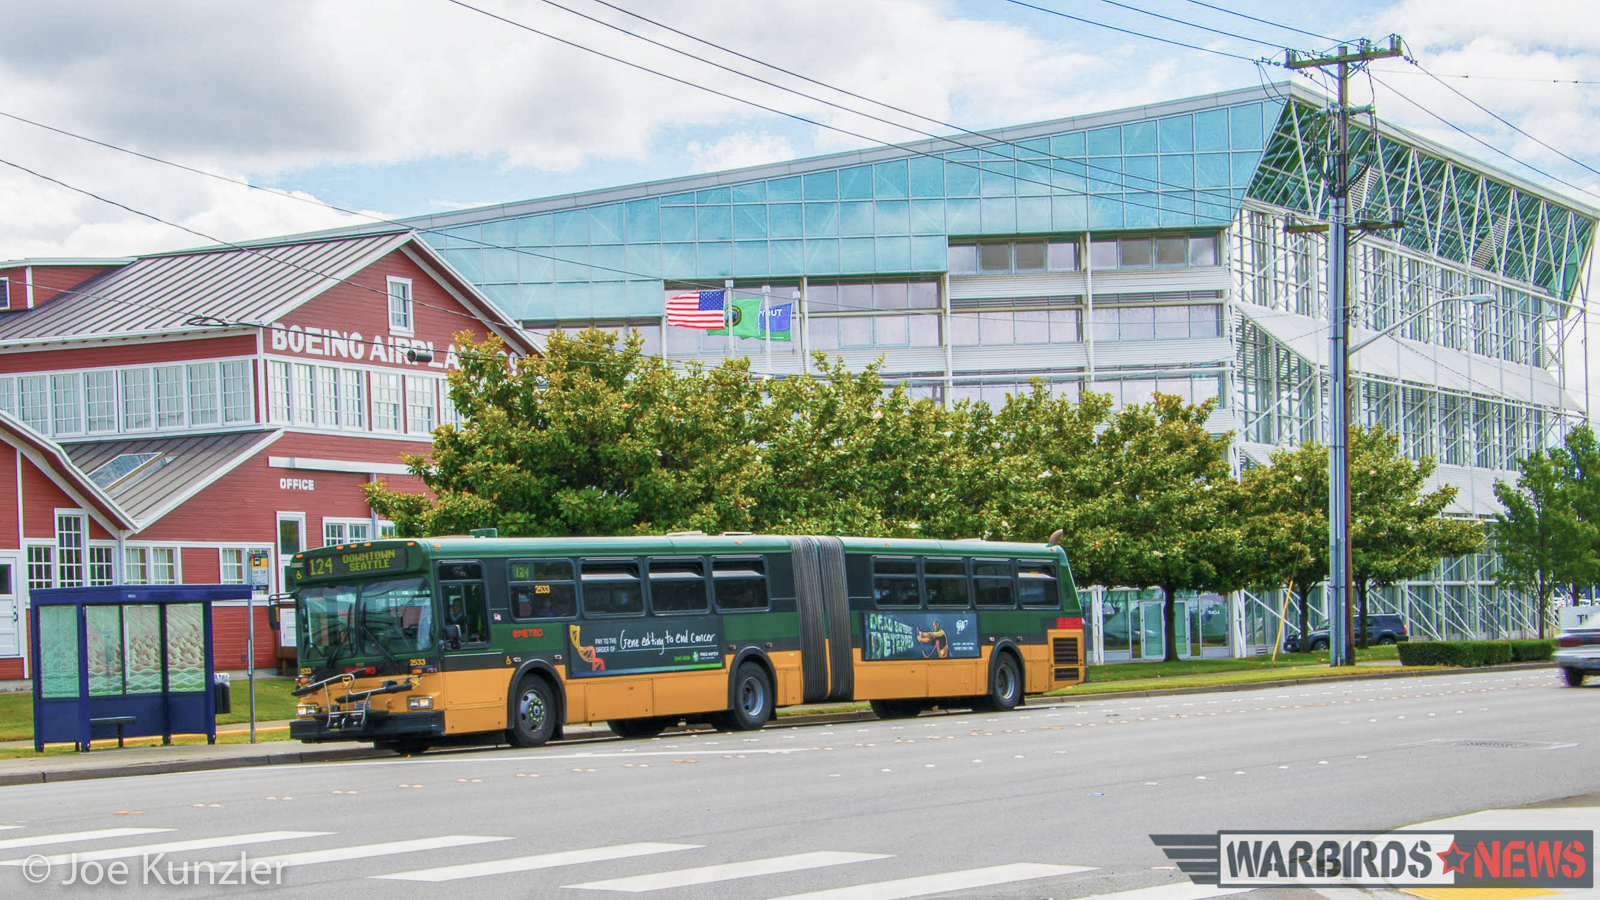 The 124 bus outside the Museum of Flight's main campus at Boeing Field. (photo by Joe Kunzler)